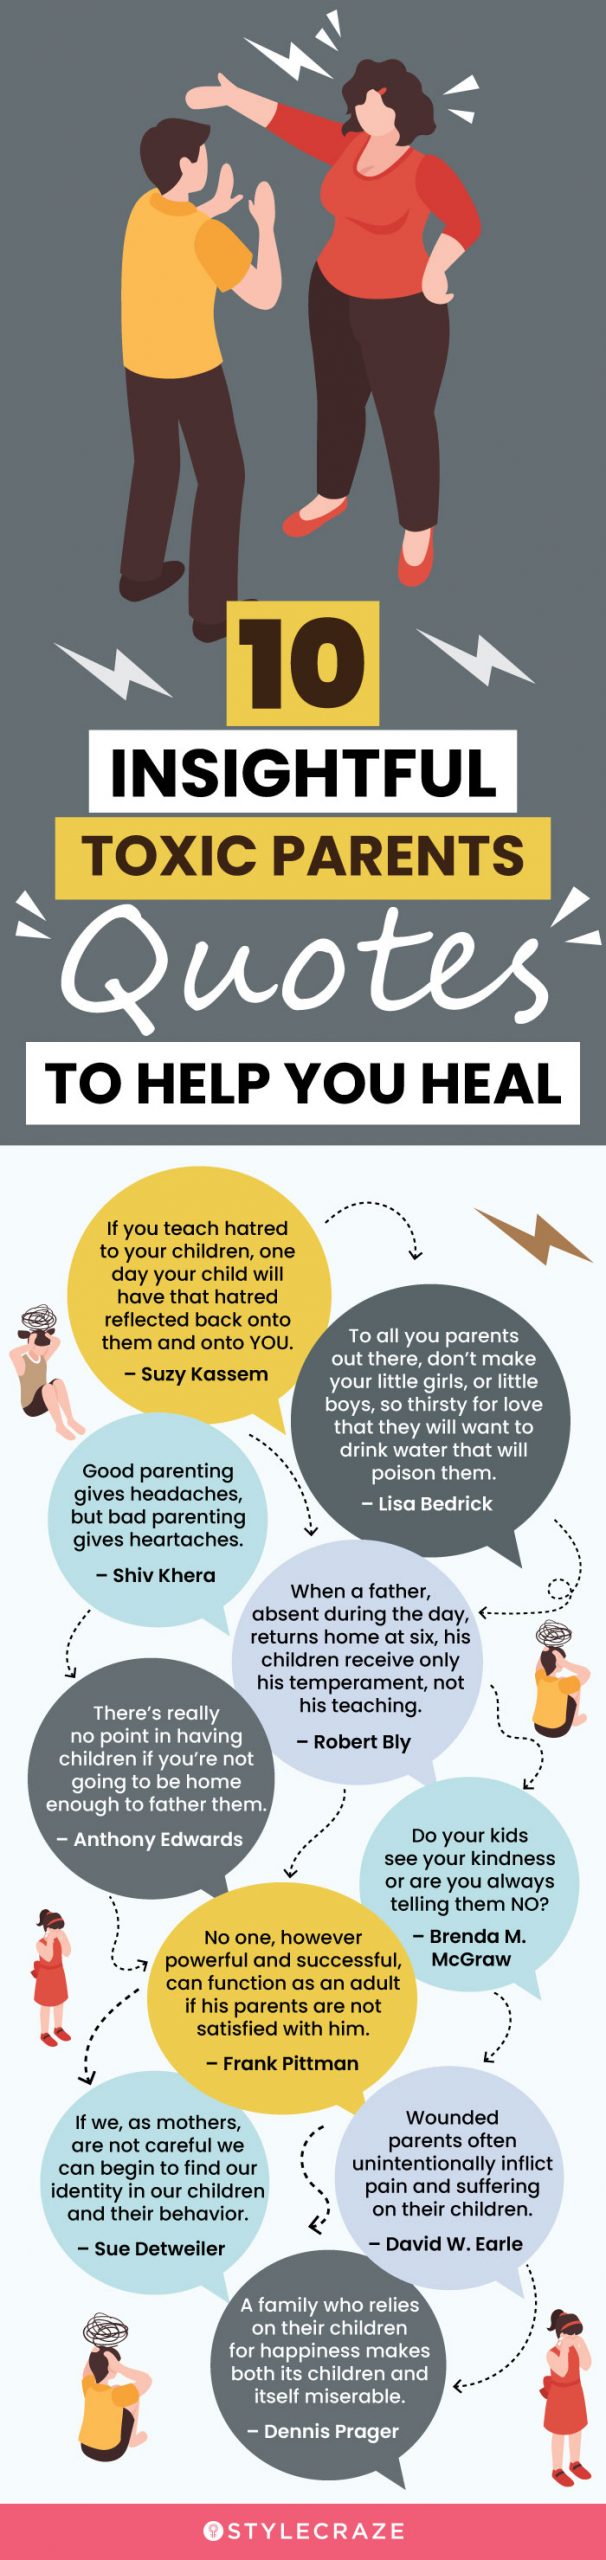 10 insightful toxic parents quotes to help you heal (infographic)